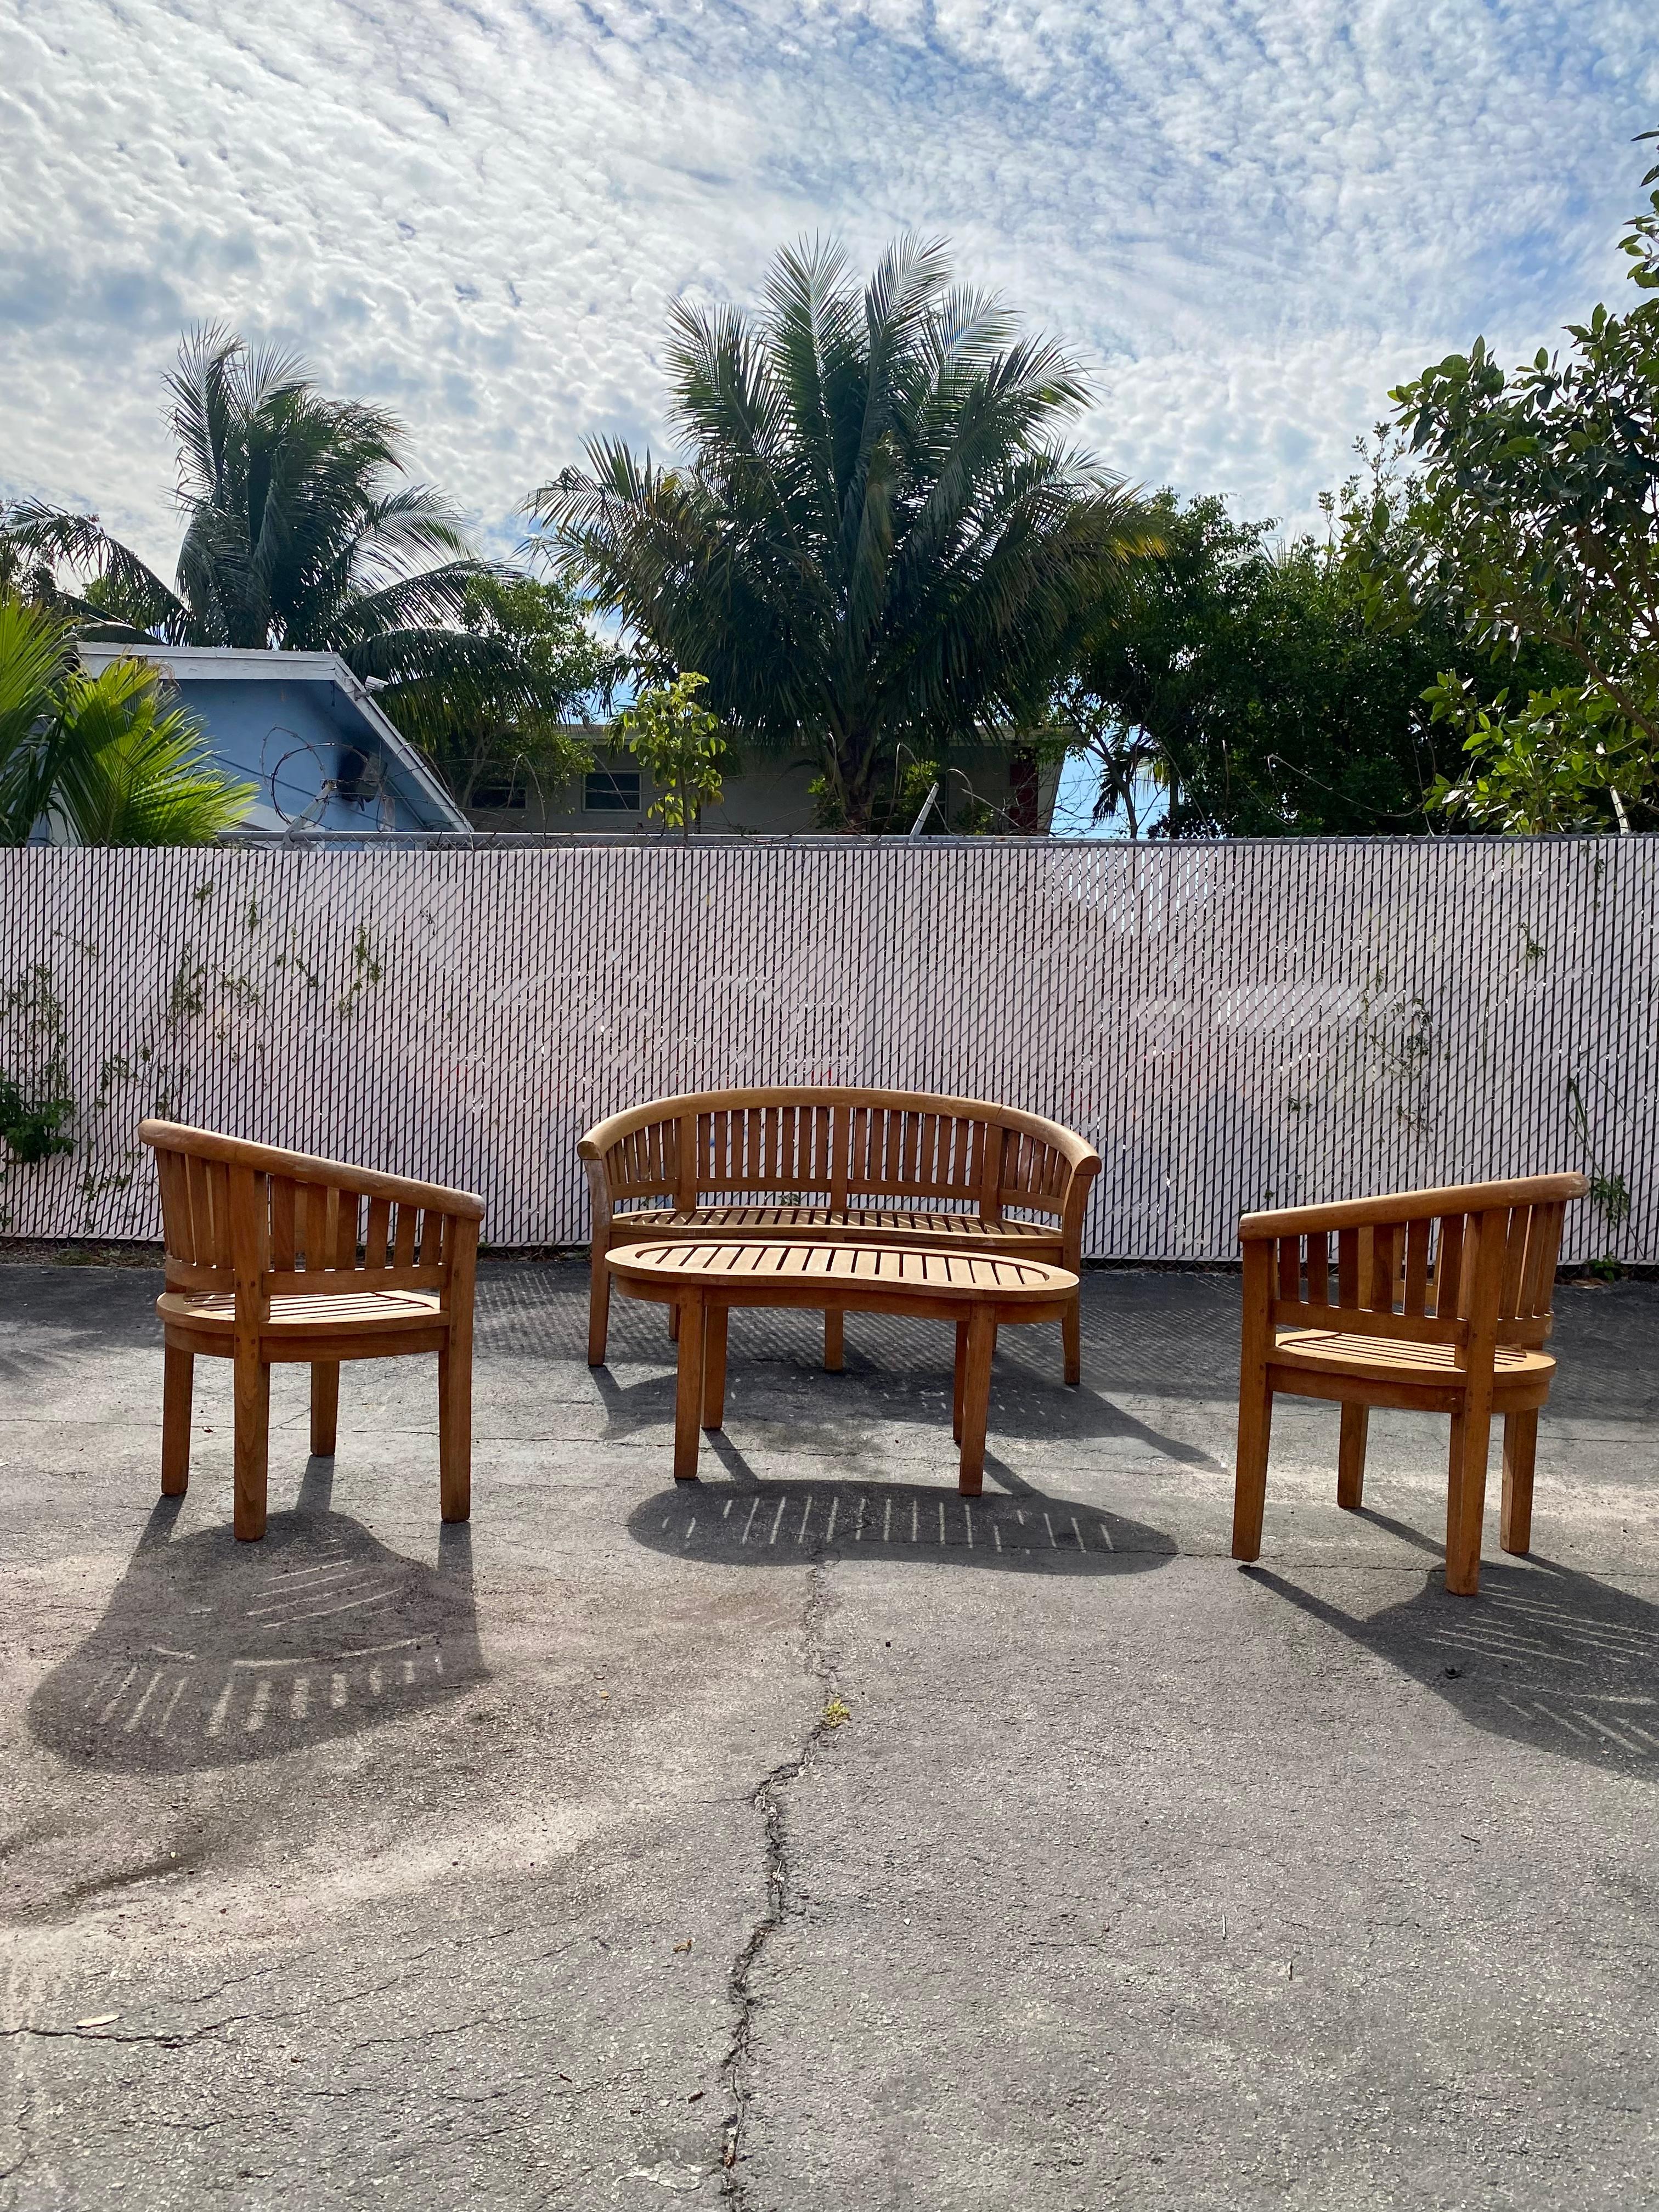 On offer on this occasion is one of the most stunning, teak kidney set you could hope to find. This is Outstanding design is exhibited throughout. Just look at the gorgeous curved details on this beauty! The details on this set reflect the expert